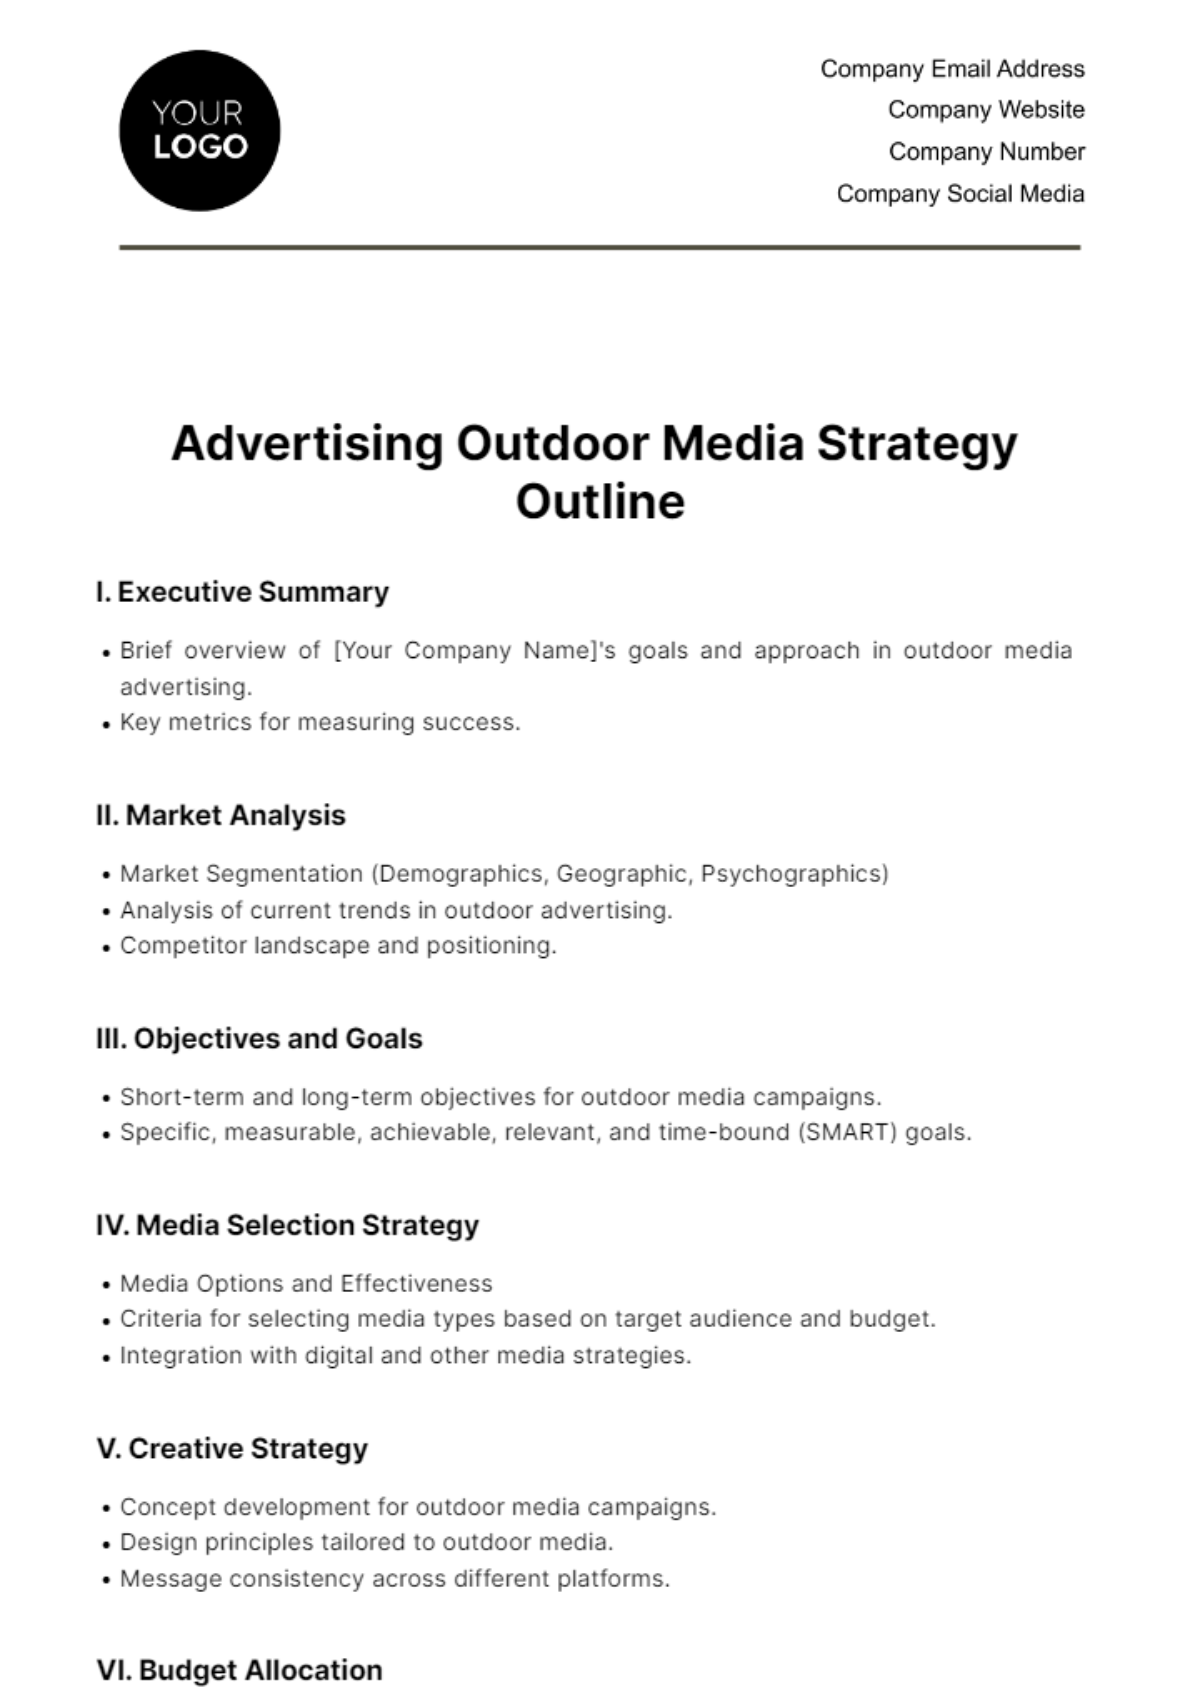 Advertising Outdoor Media Strategy Outline Template